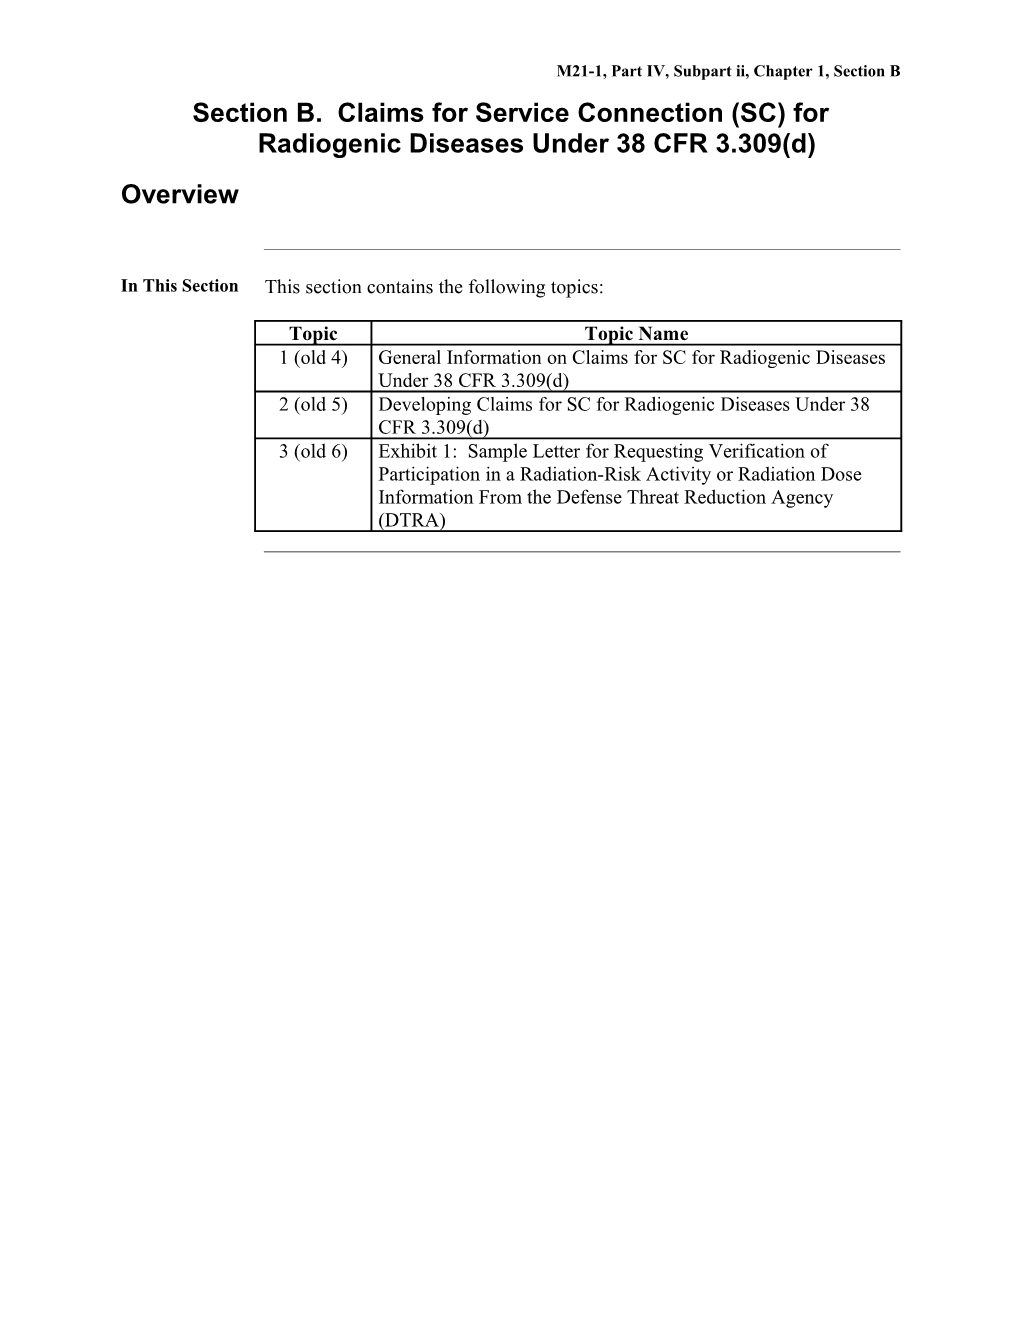 Section B. Claims for Service Connection for Radiogenic Diseases Under 38 CFR 3.309(D)